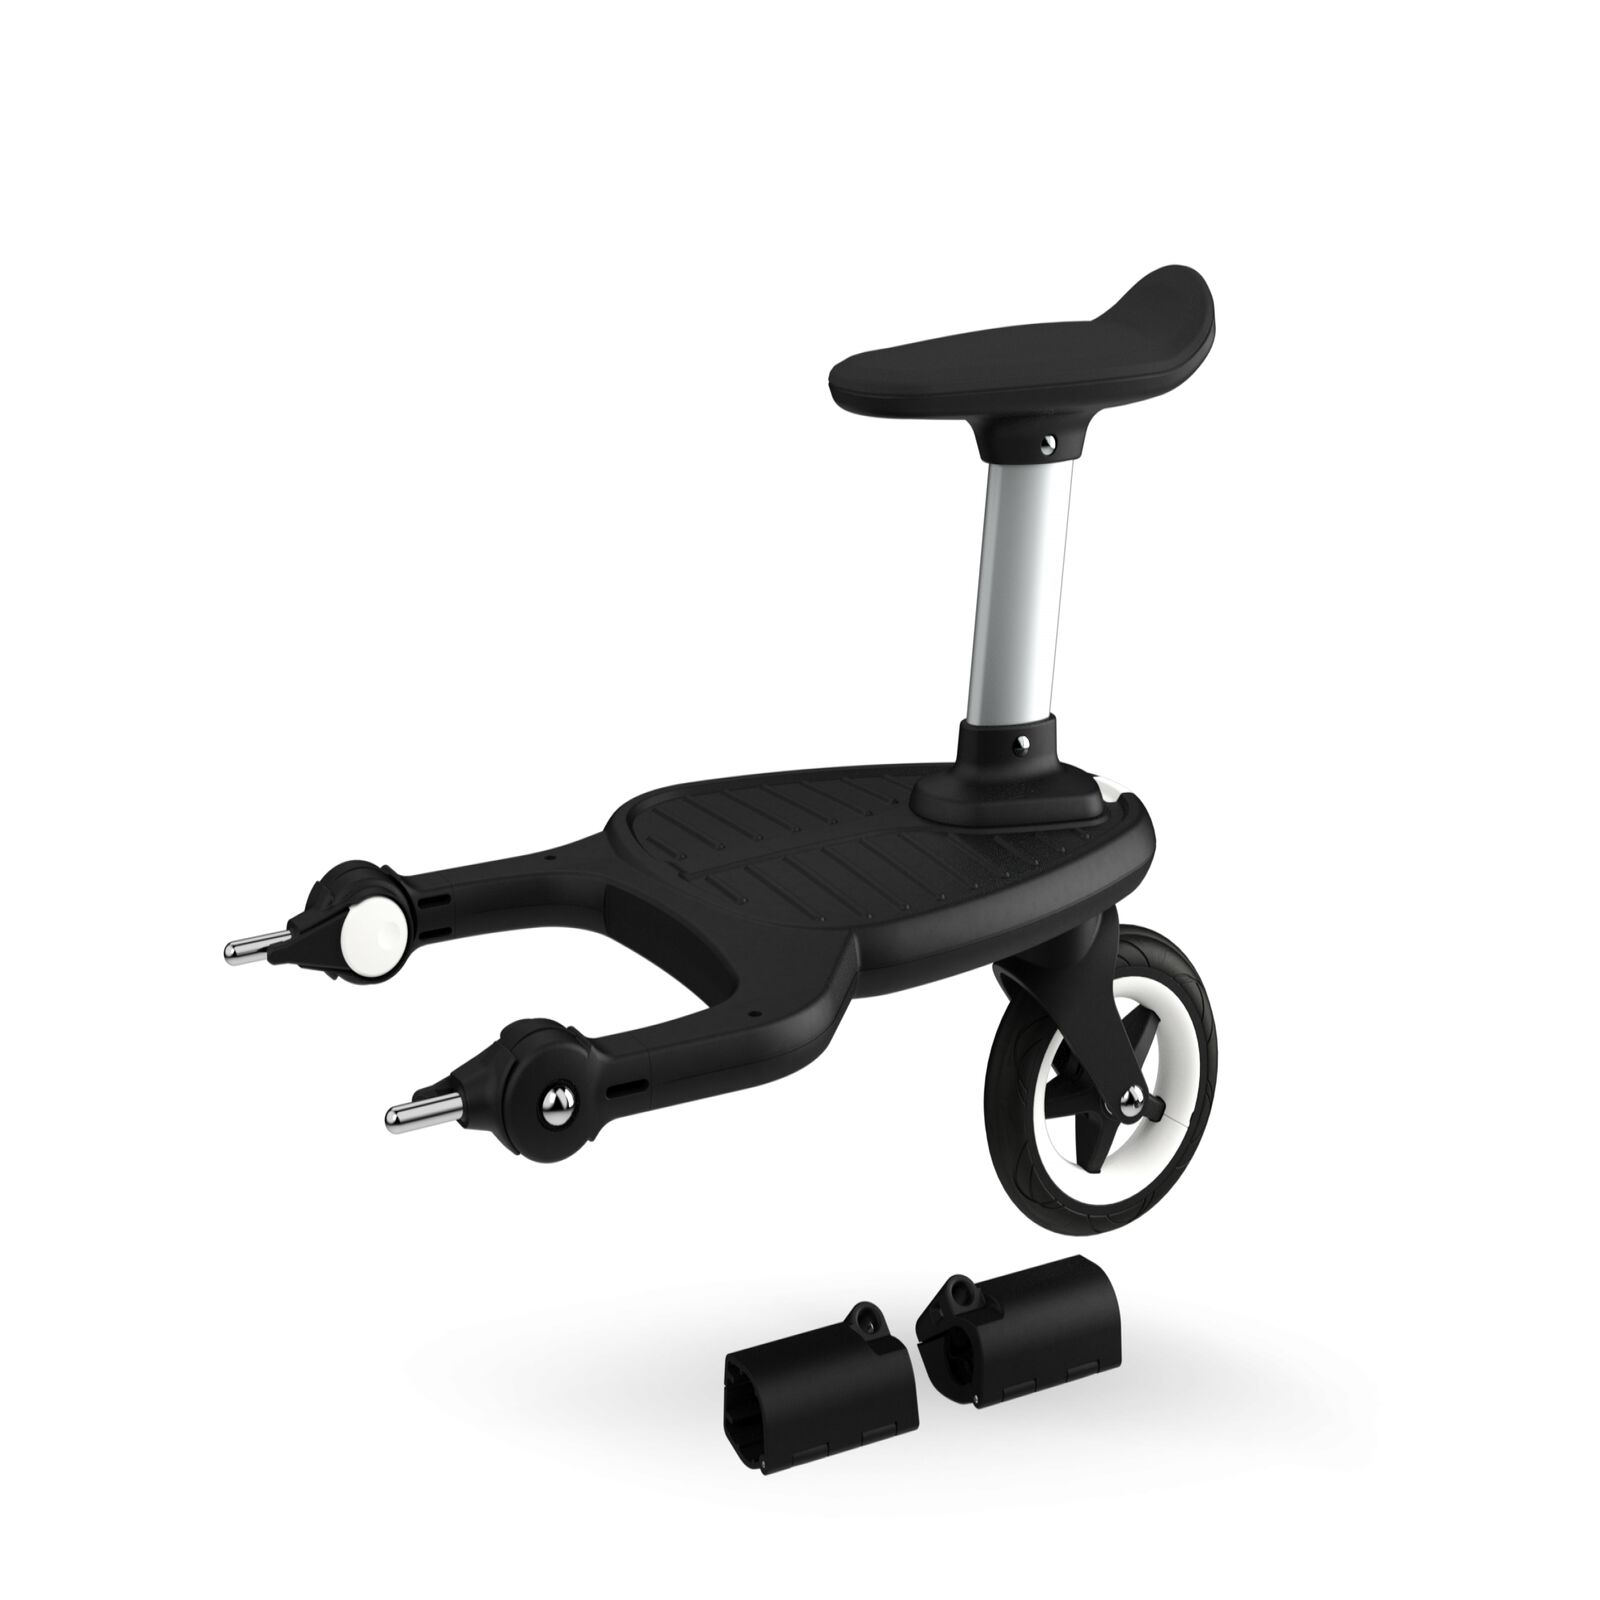 Bugaboo Cameleon 3 adapter for Bugaboo comfort wheeled board - View 2